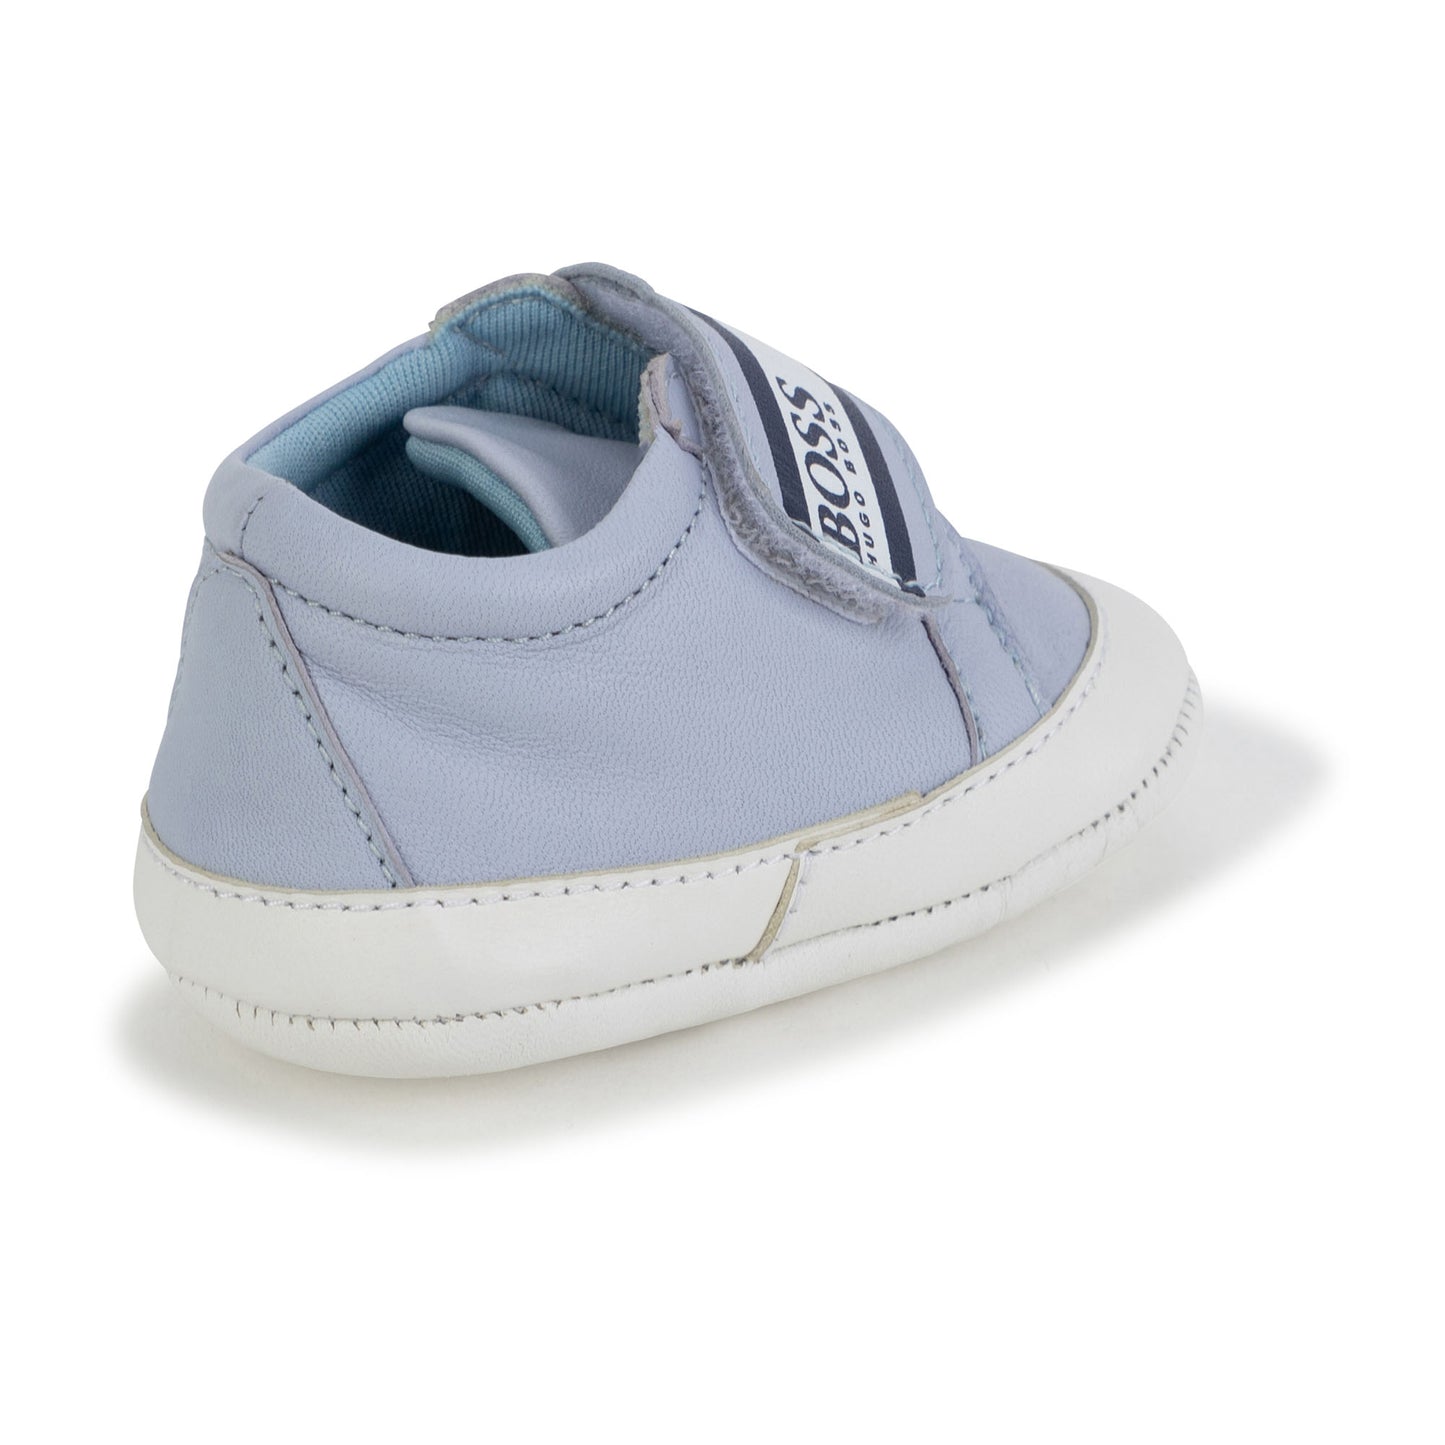 Hugo Boss Baby Leather Shoes J99100